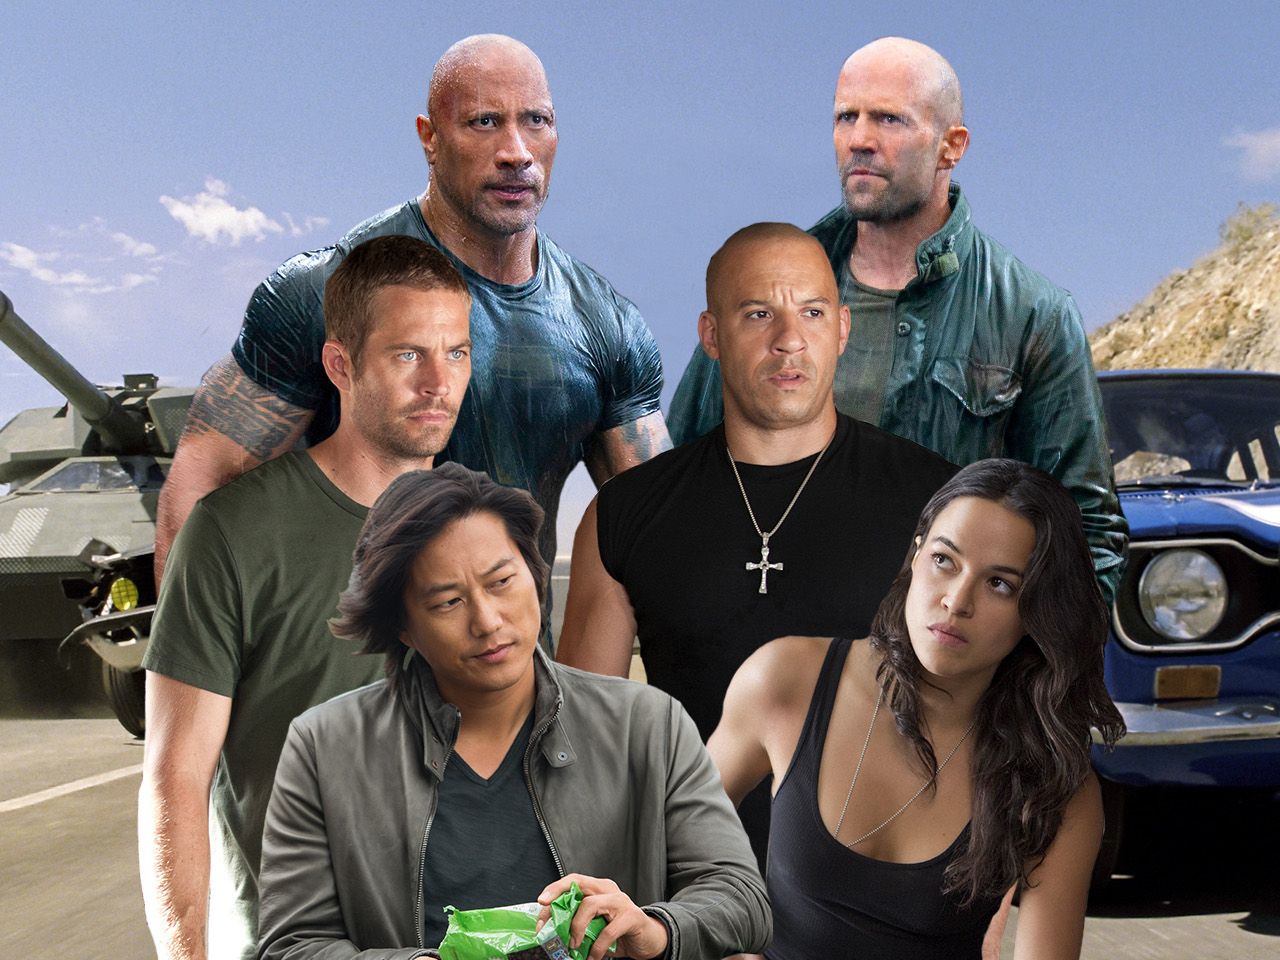 fast and furious 6 dvd wallpaper